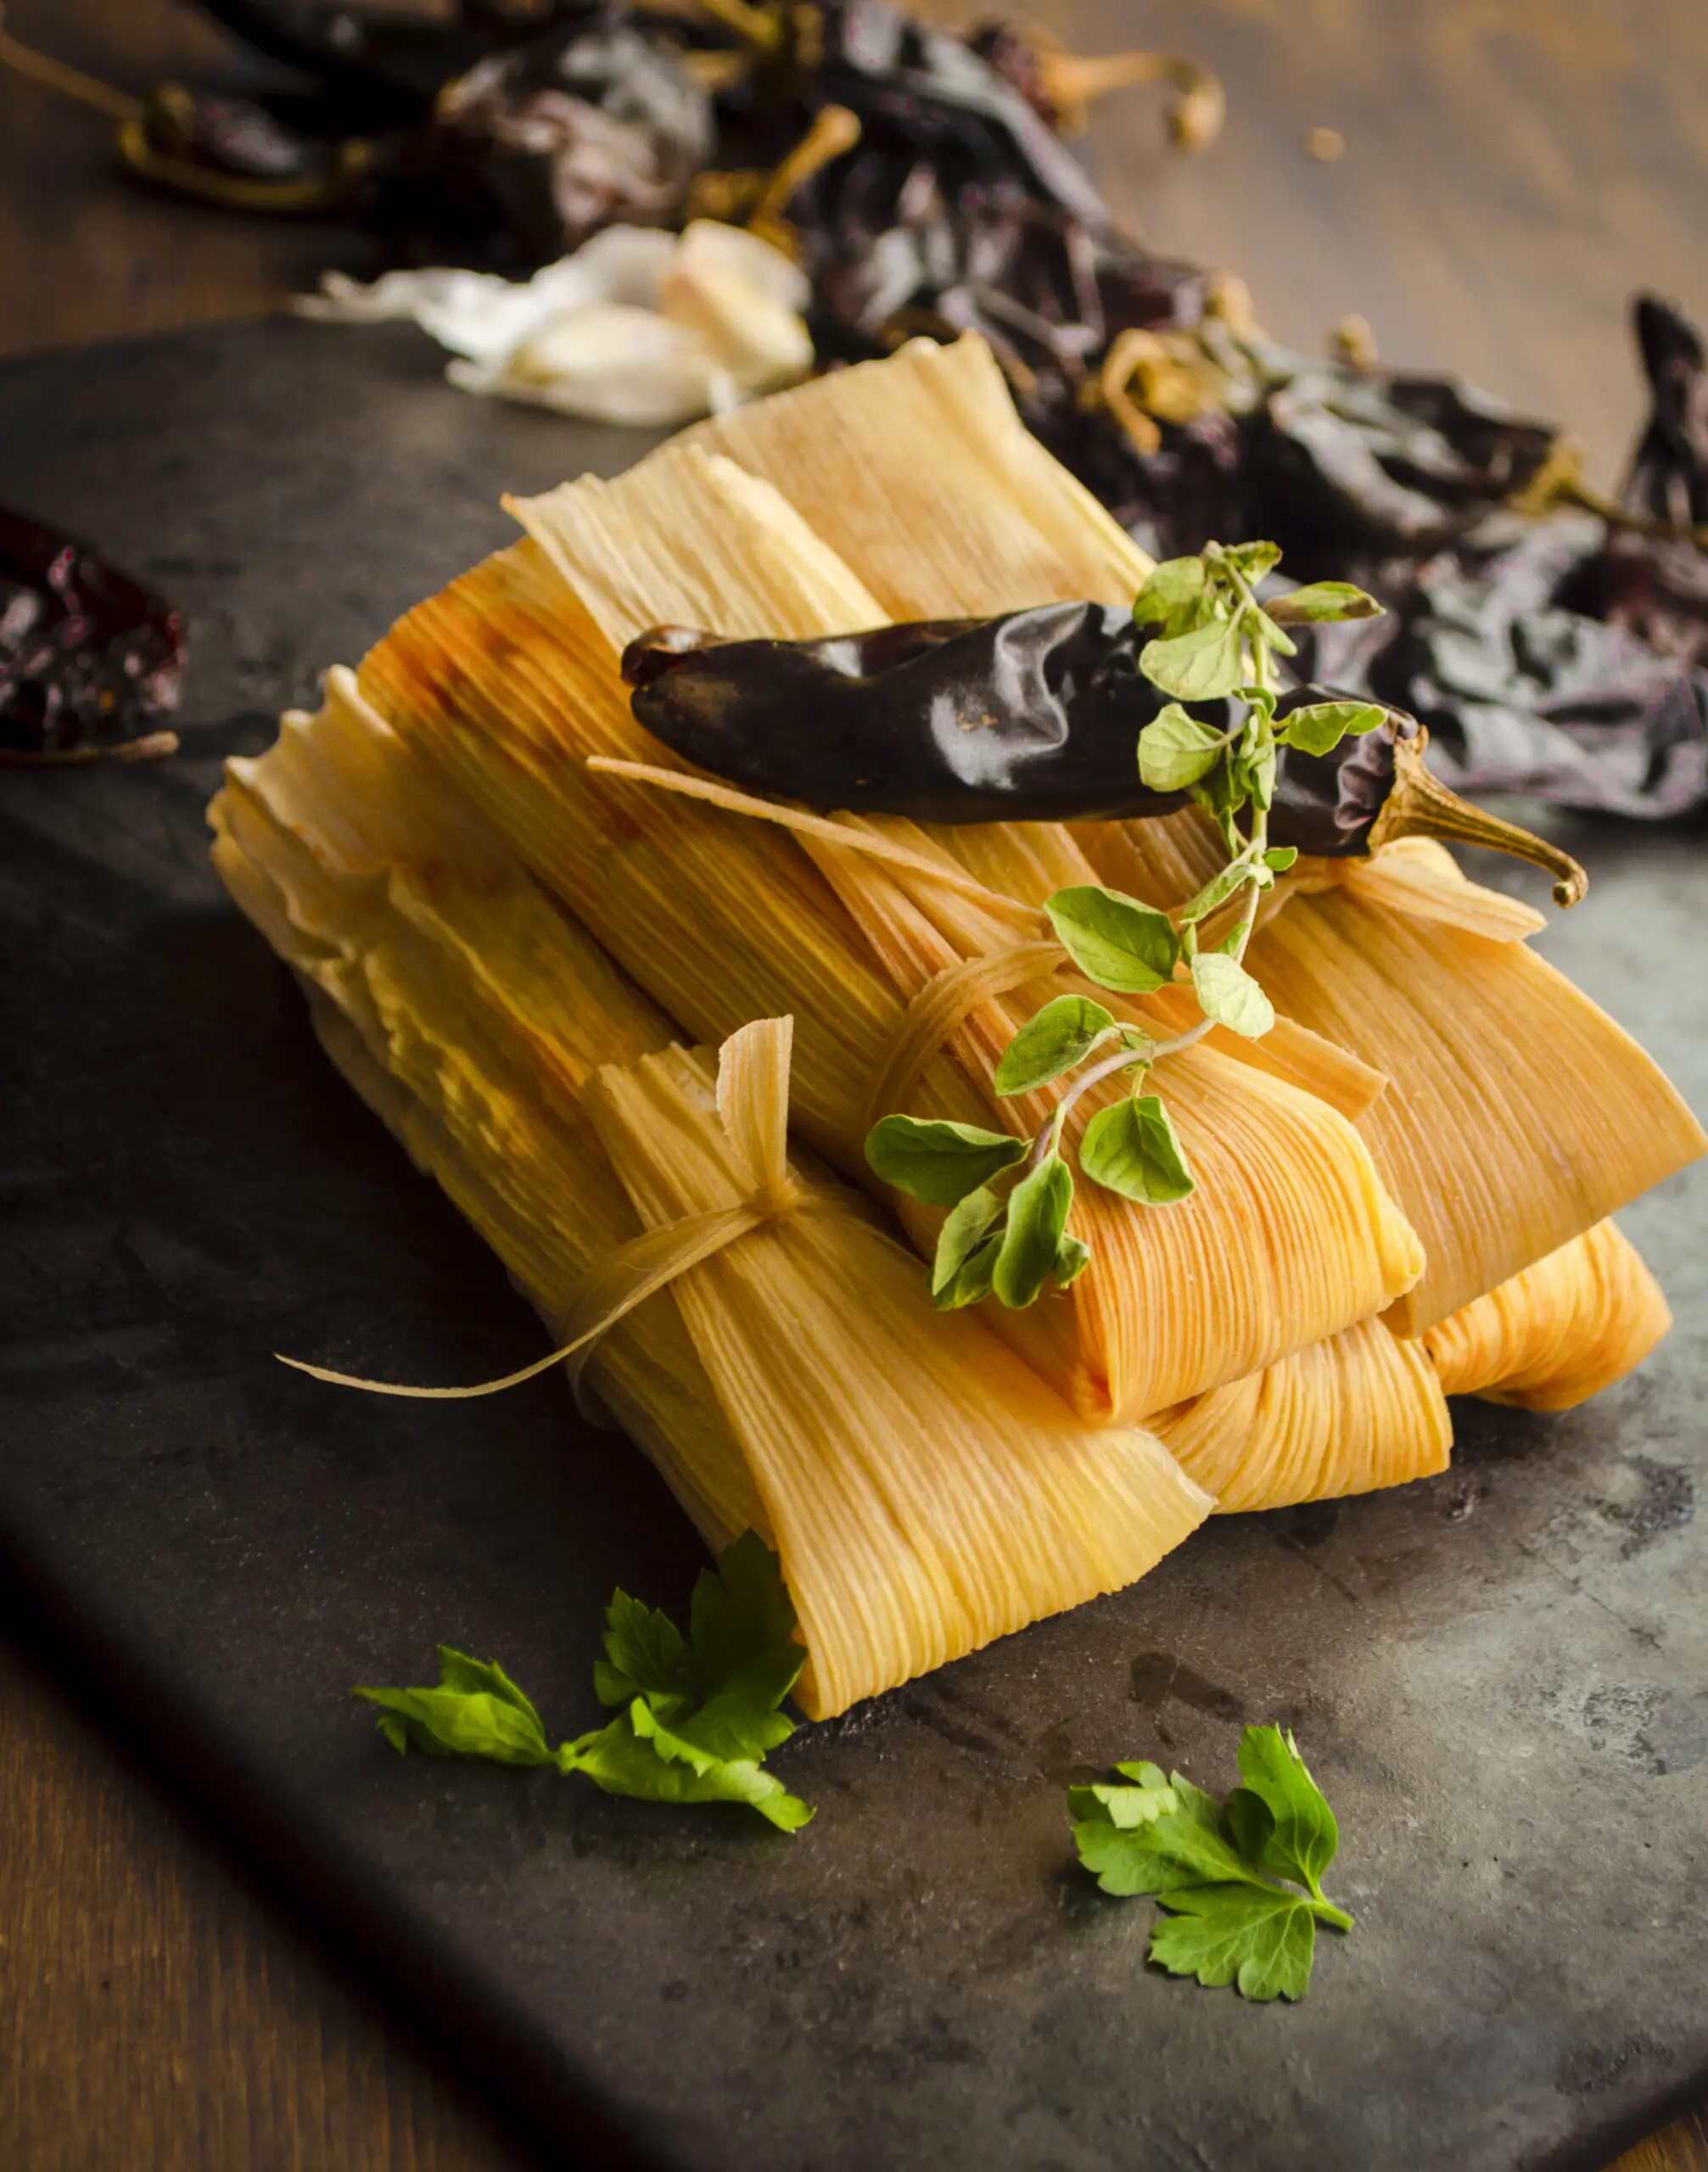 What is the Tamale tradition?